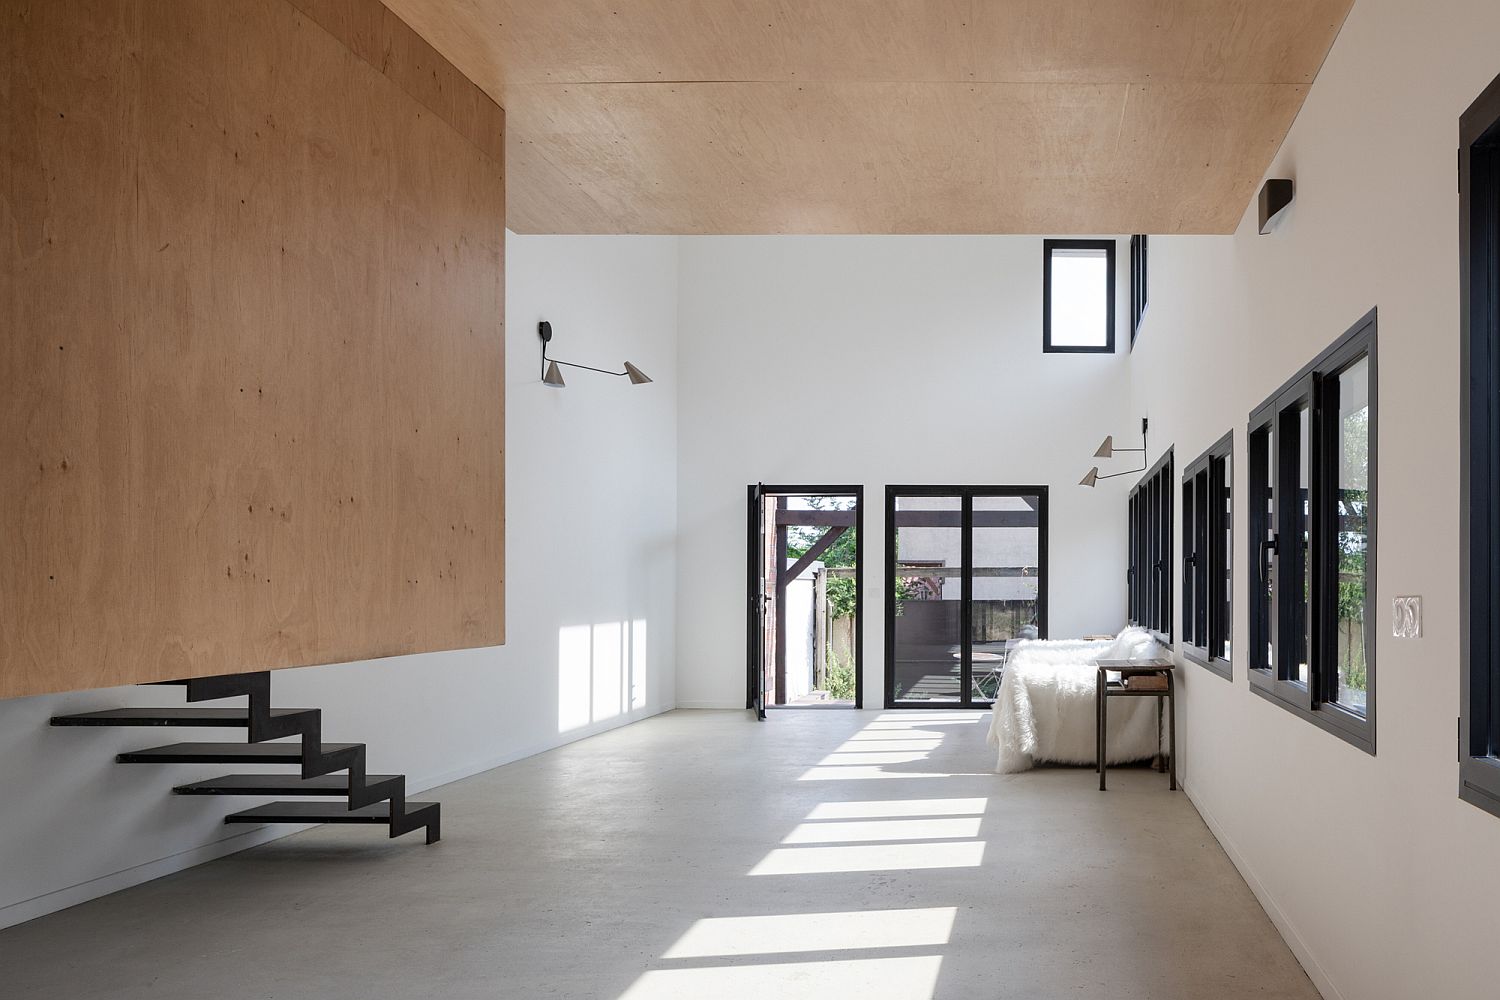 Ample natural light floods the interior of this Montreuil residence